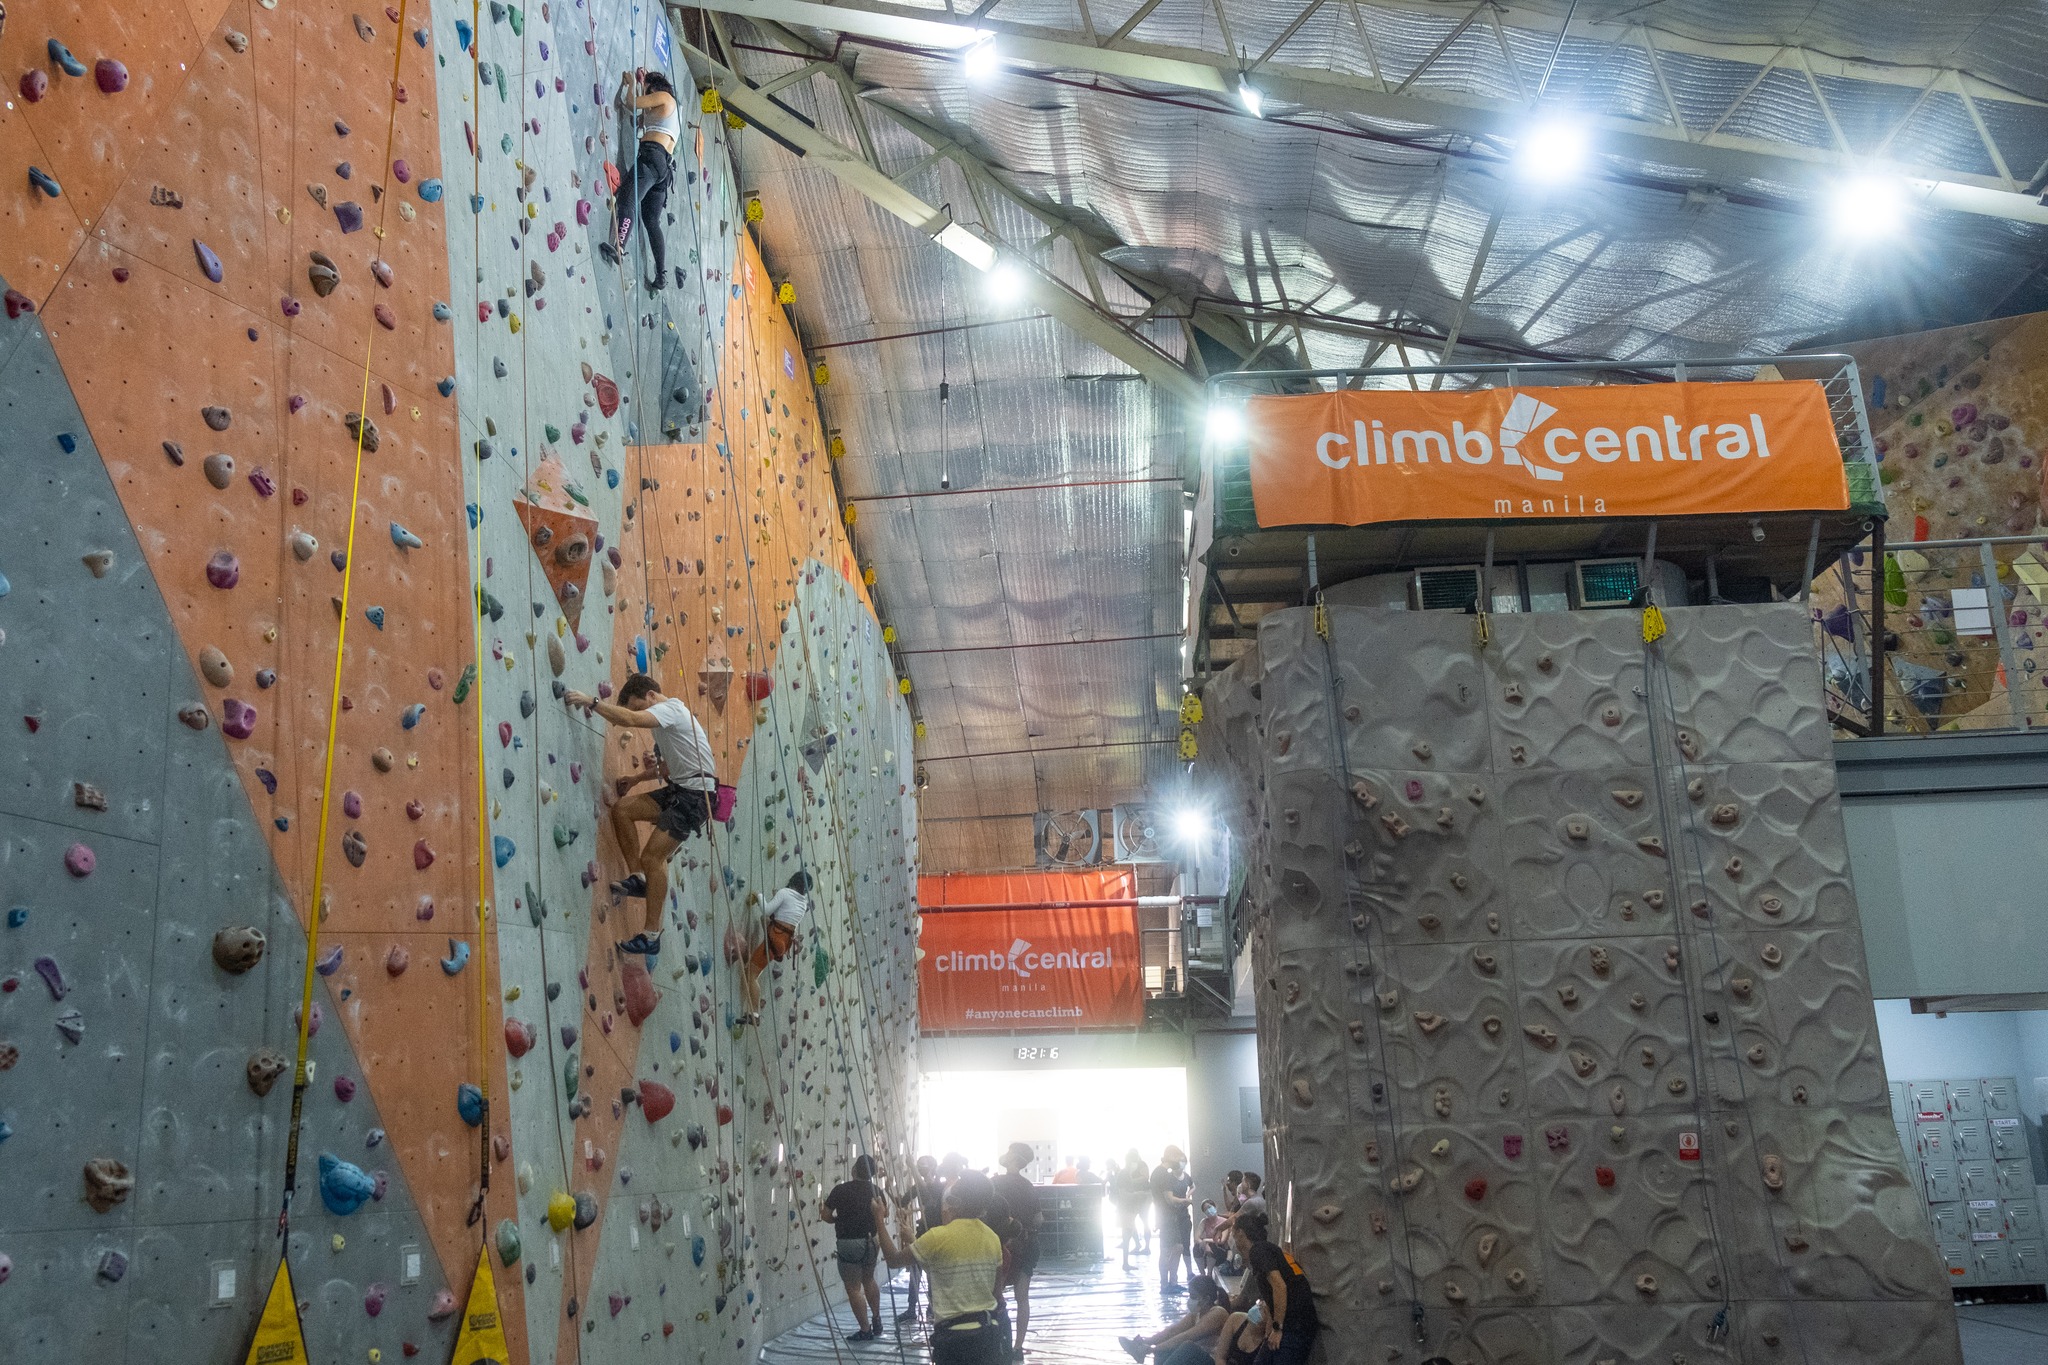 Climb Central Manila for Fathers Day